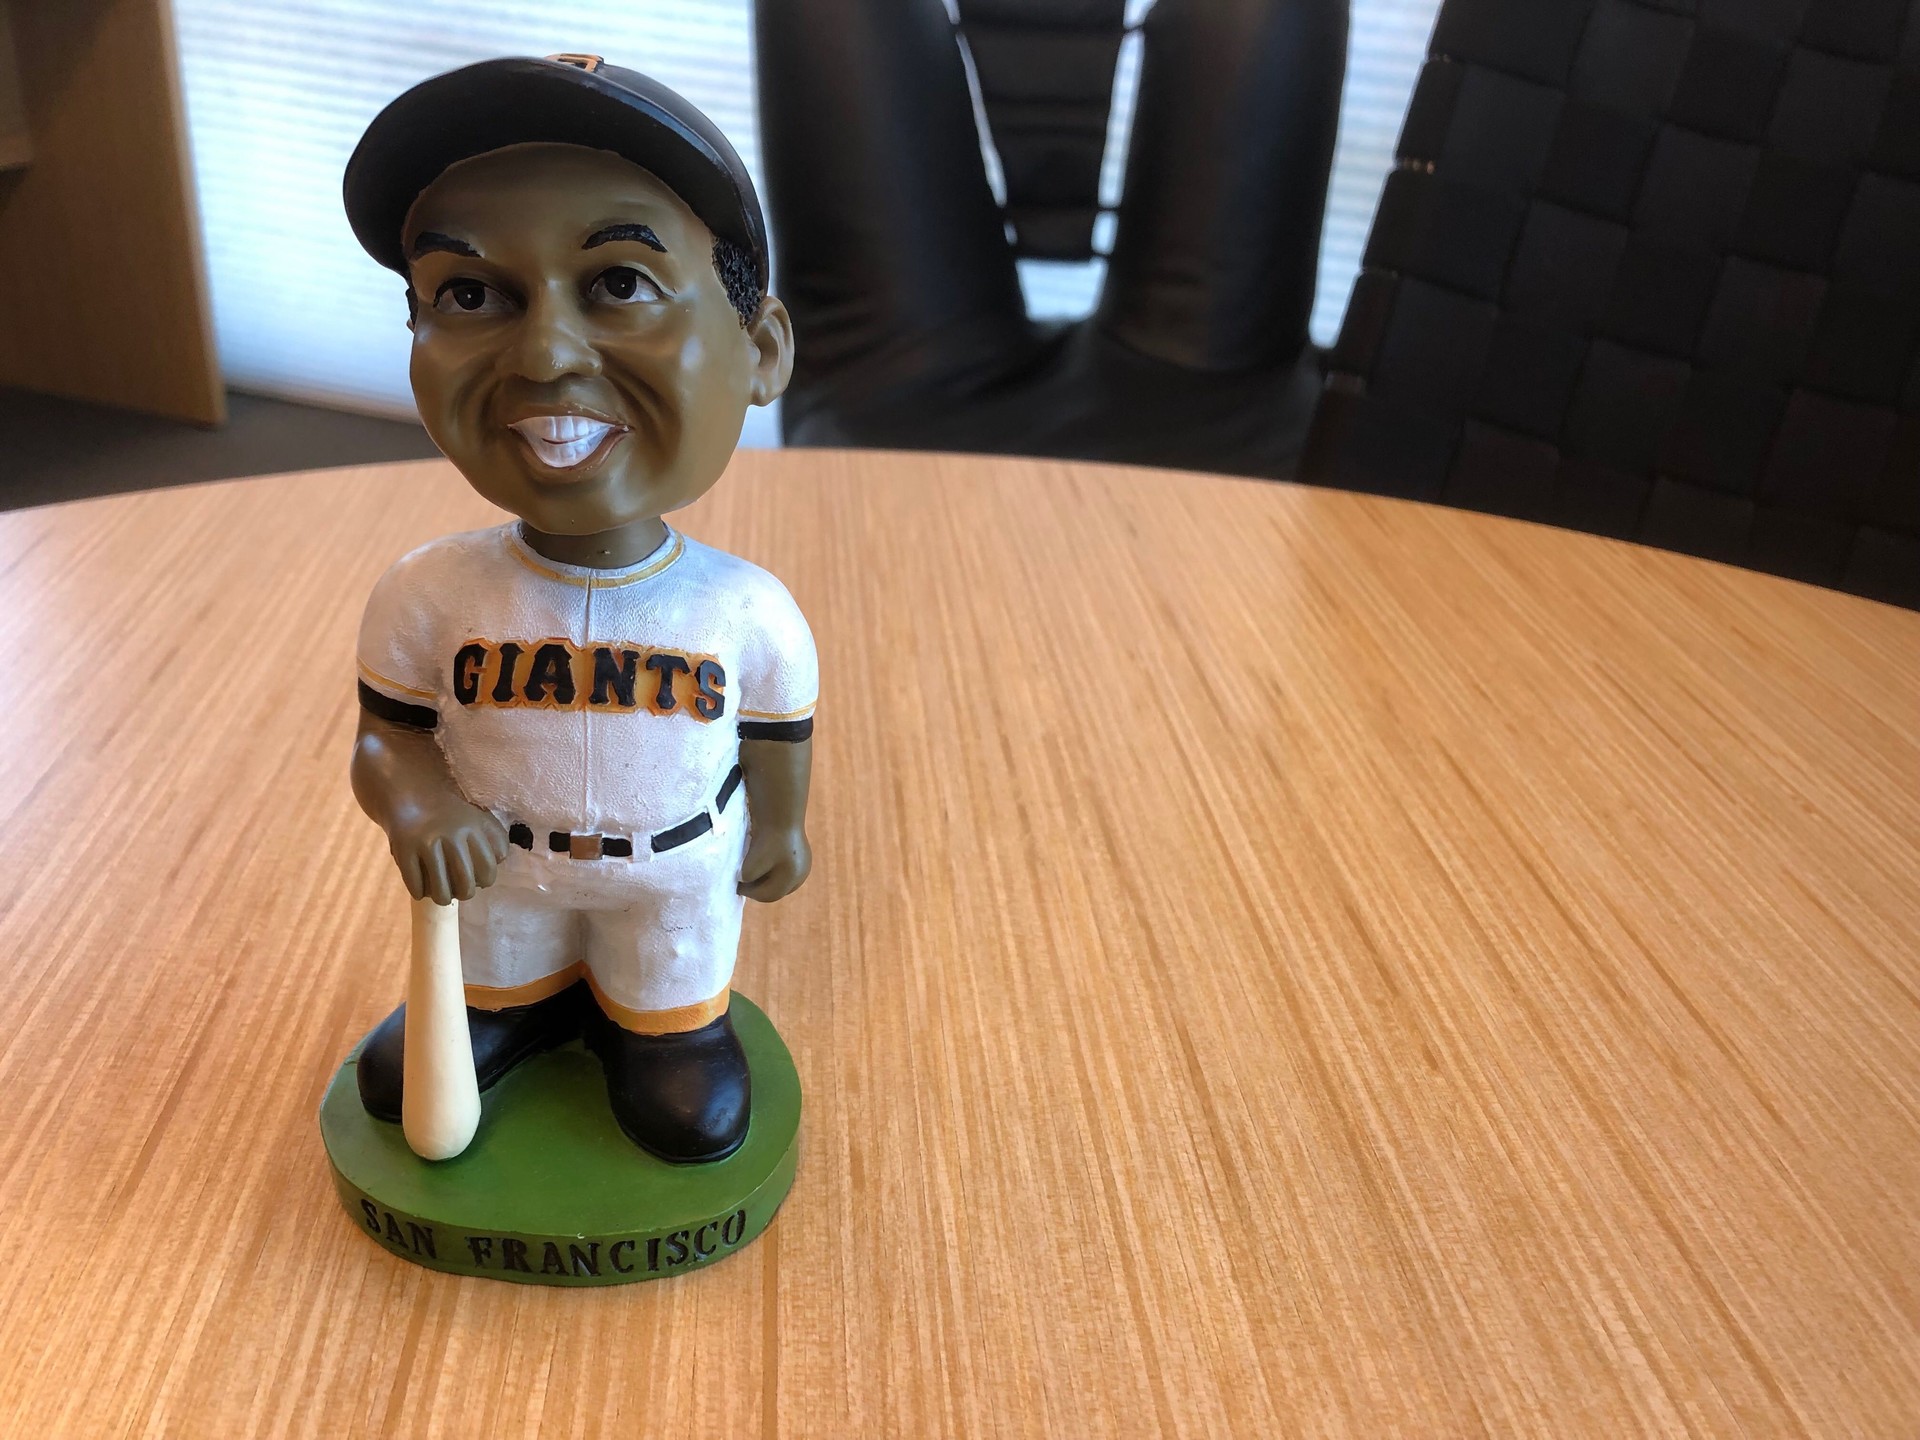 RIDING IN A CAR SGA WILLIE MAYS BOBBLE HEAD 60TH ANNIVERSARY OF GIANTS 